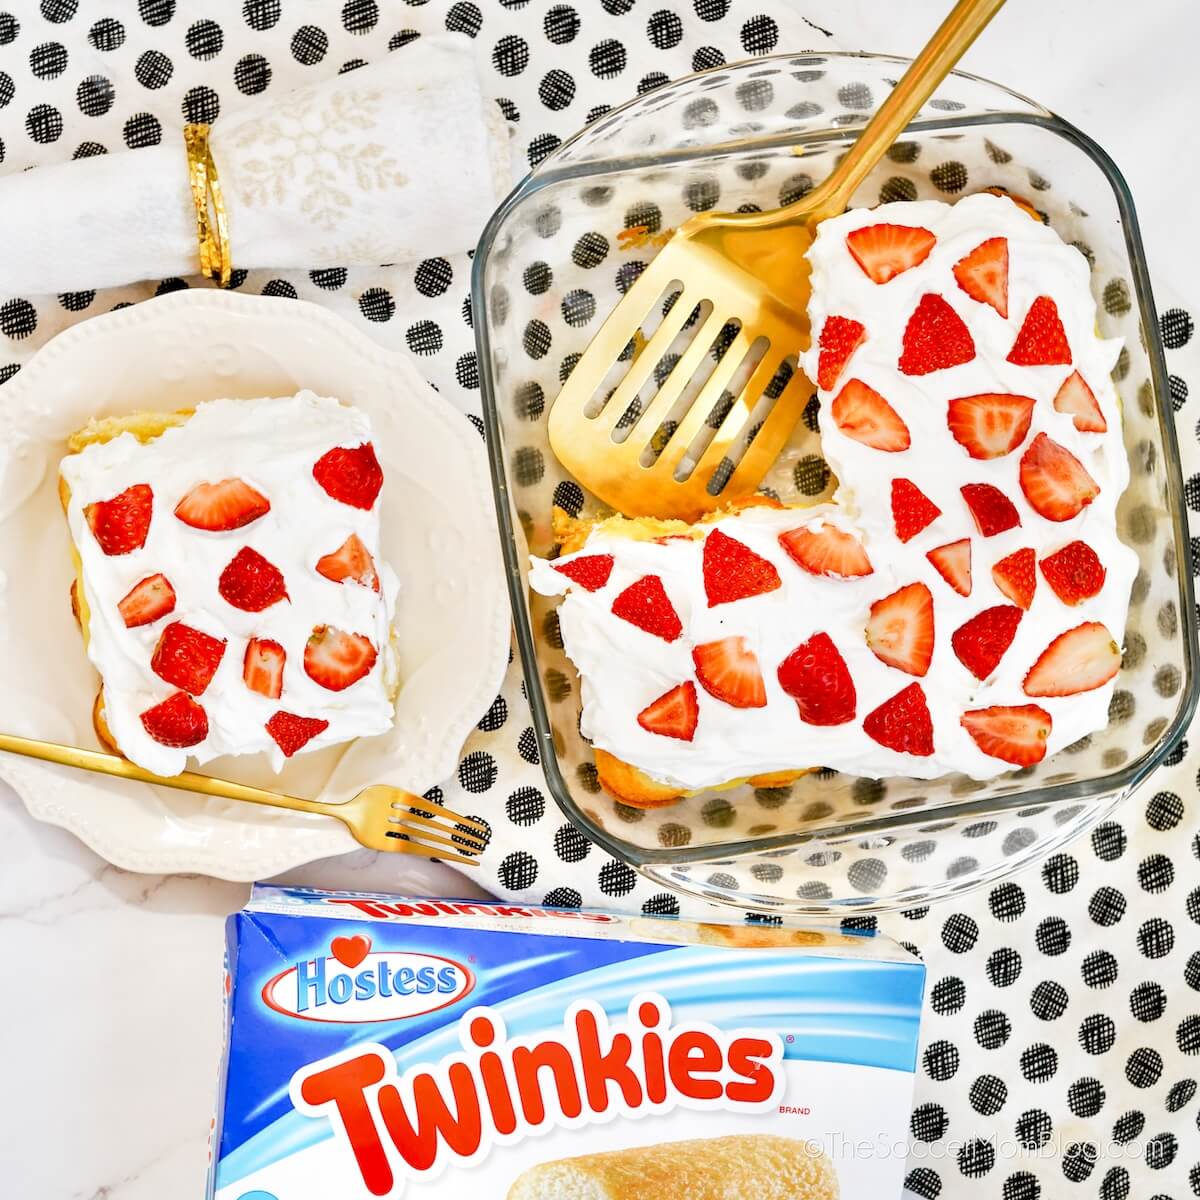 top down view of a cake made with Twinkies, whipped topping, and strawberries - next to a box of Twinkies